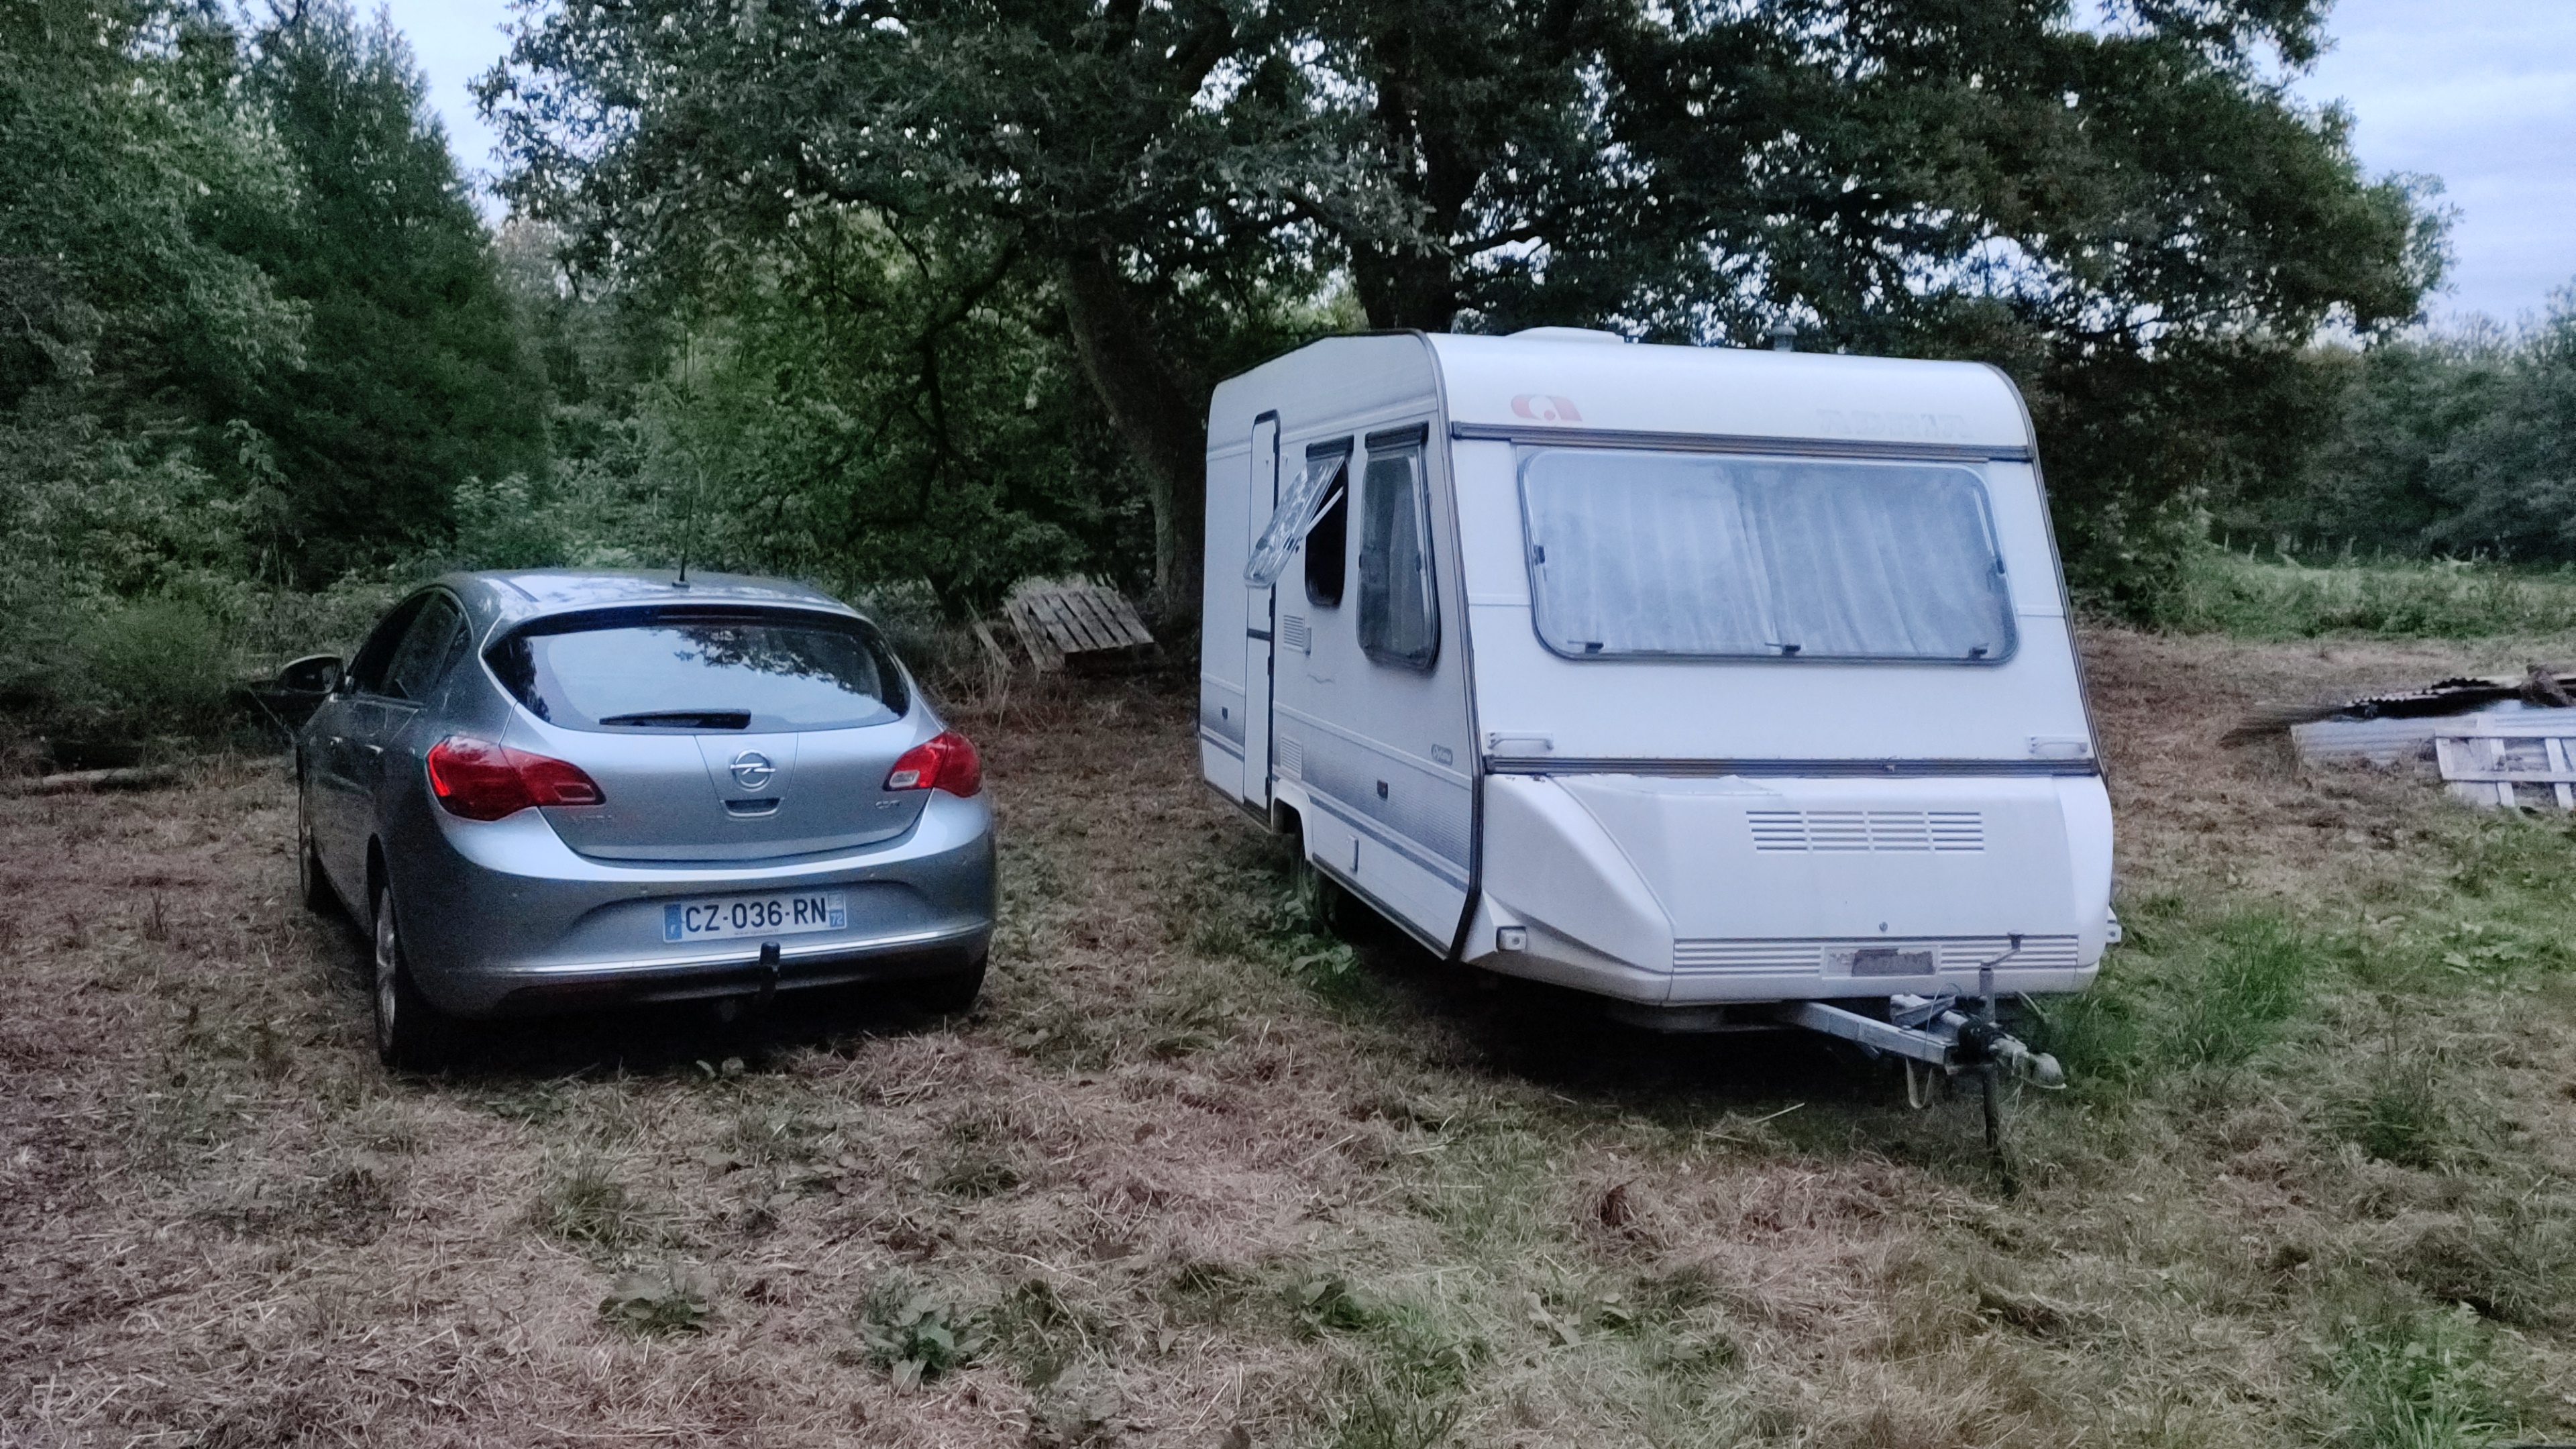 Arriving at my workaway - My car (Opel Astra 2013) and the Adria caravan